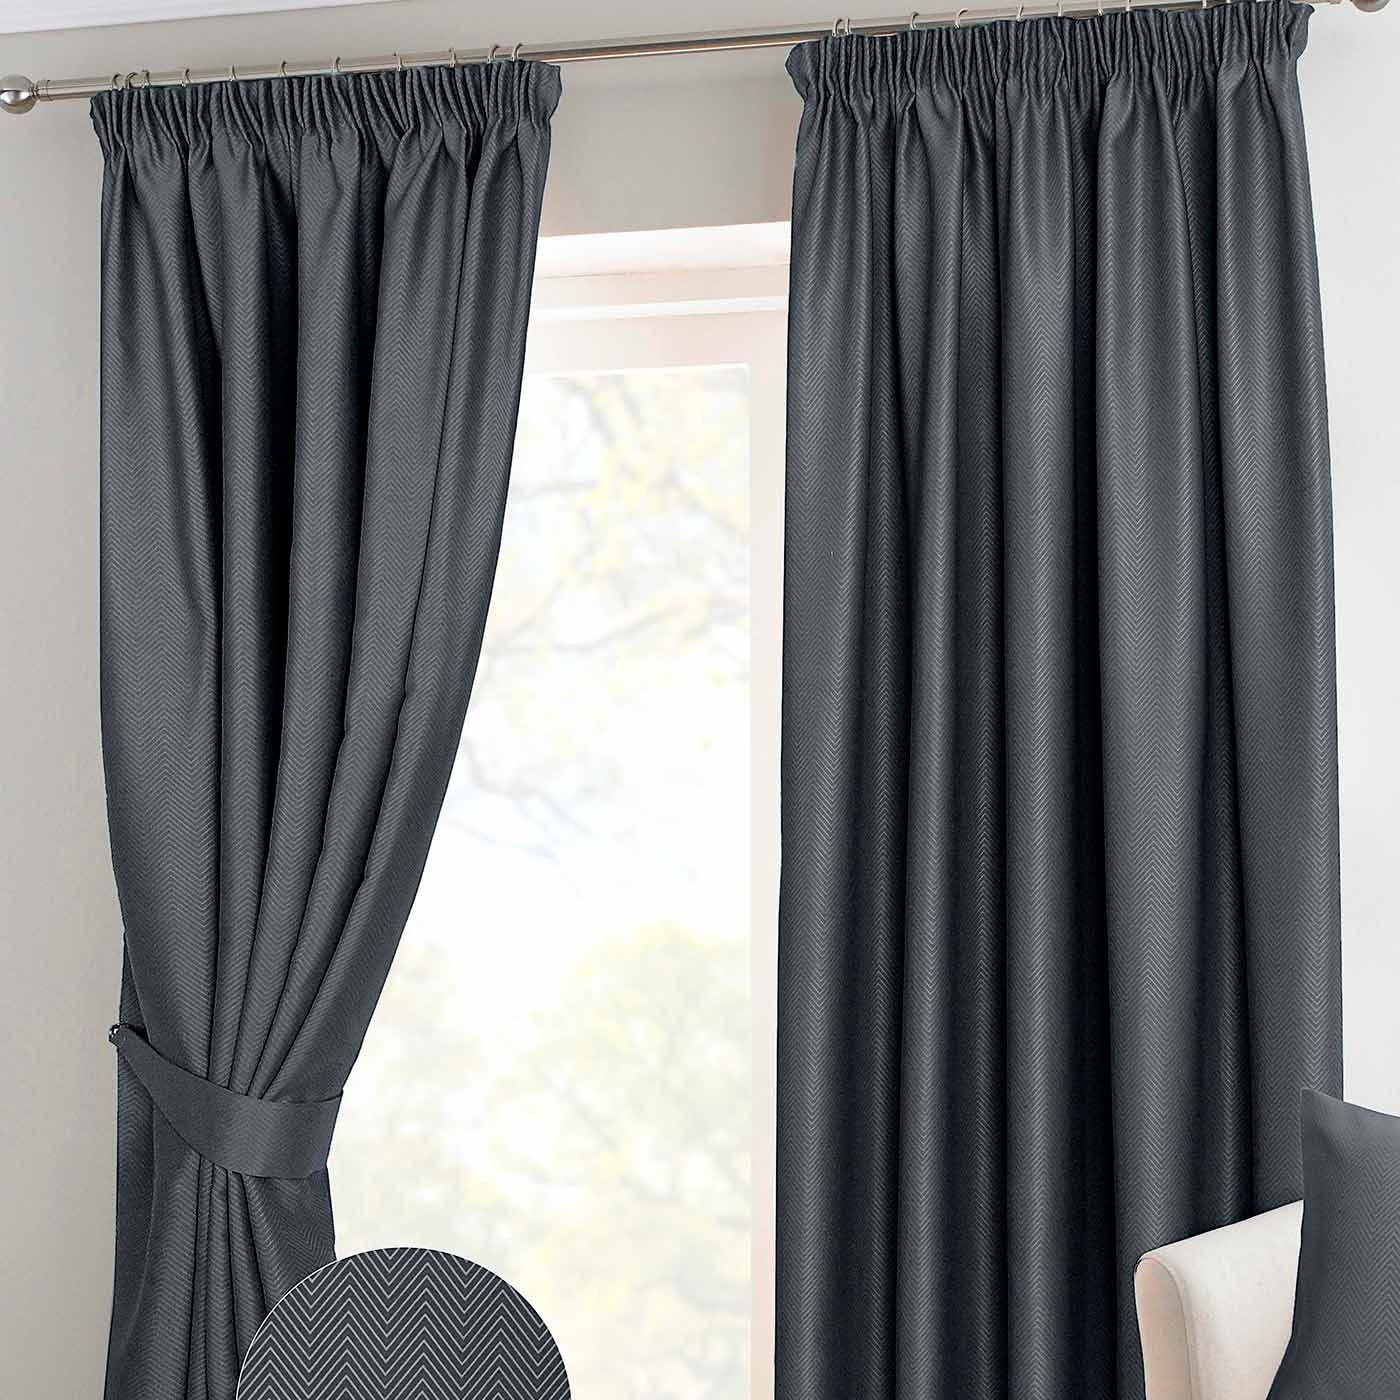 1 Pair Of Diana Plain Design Thermal Blackout 3" Pencil Pleat Lined Curtains 